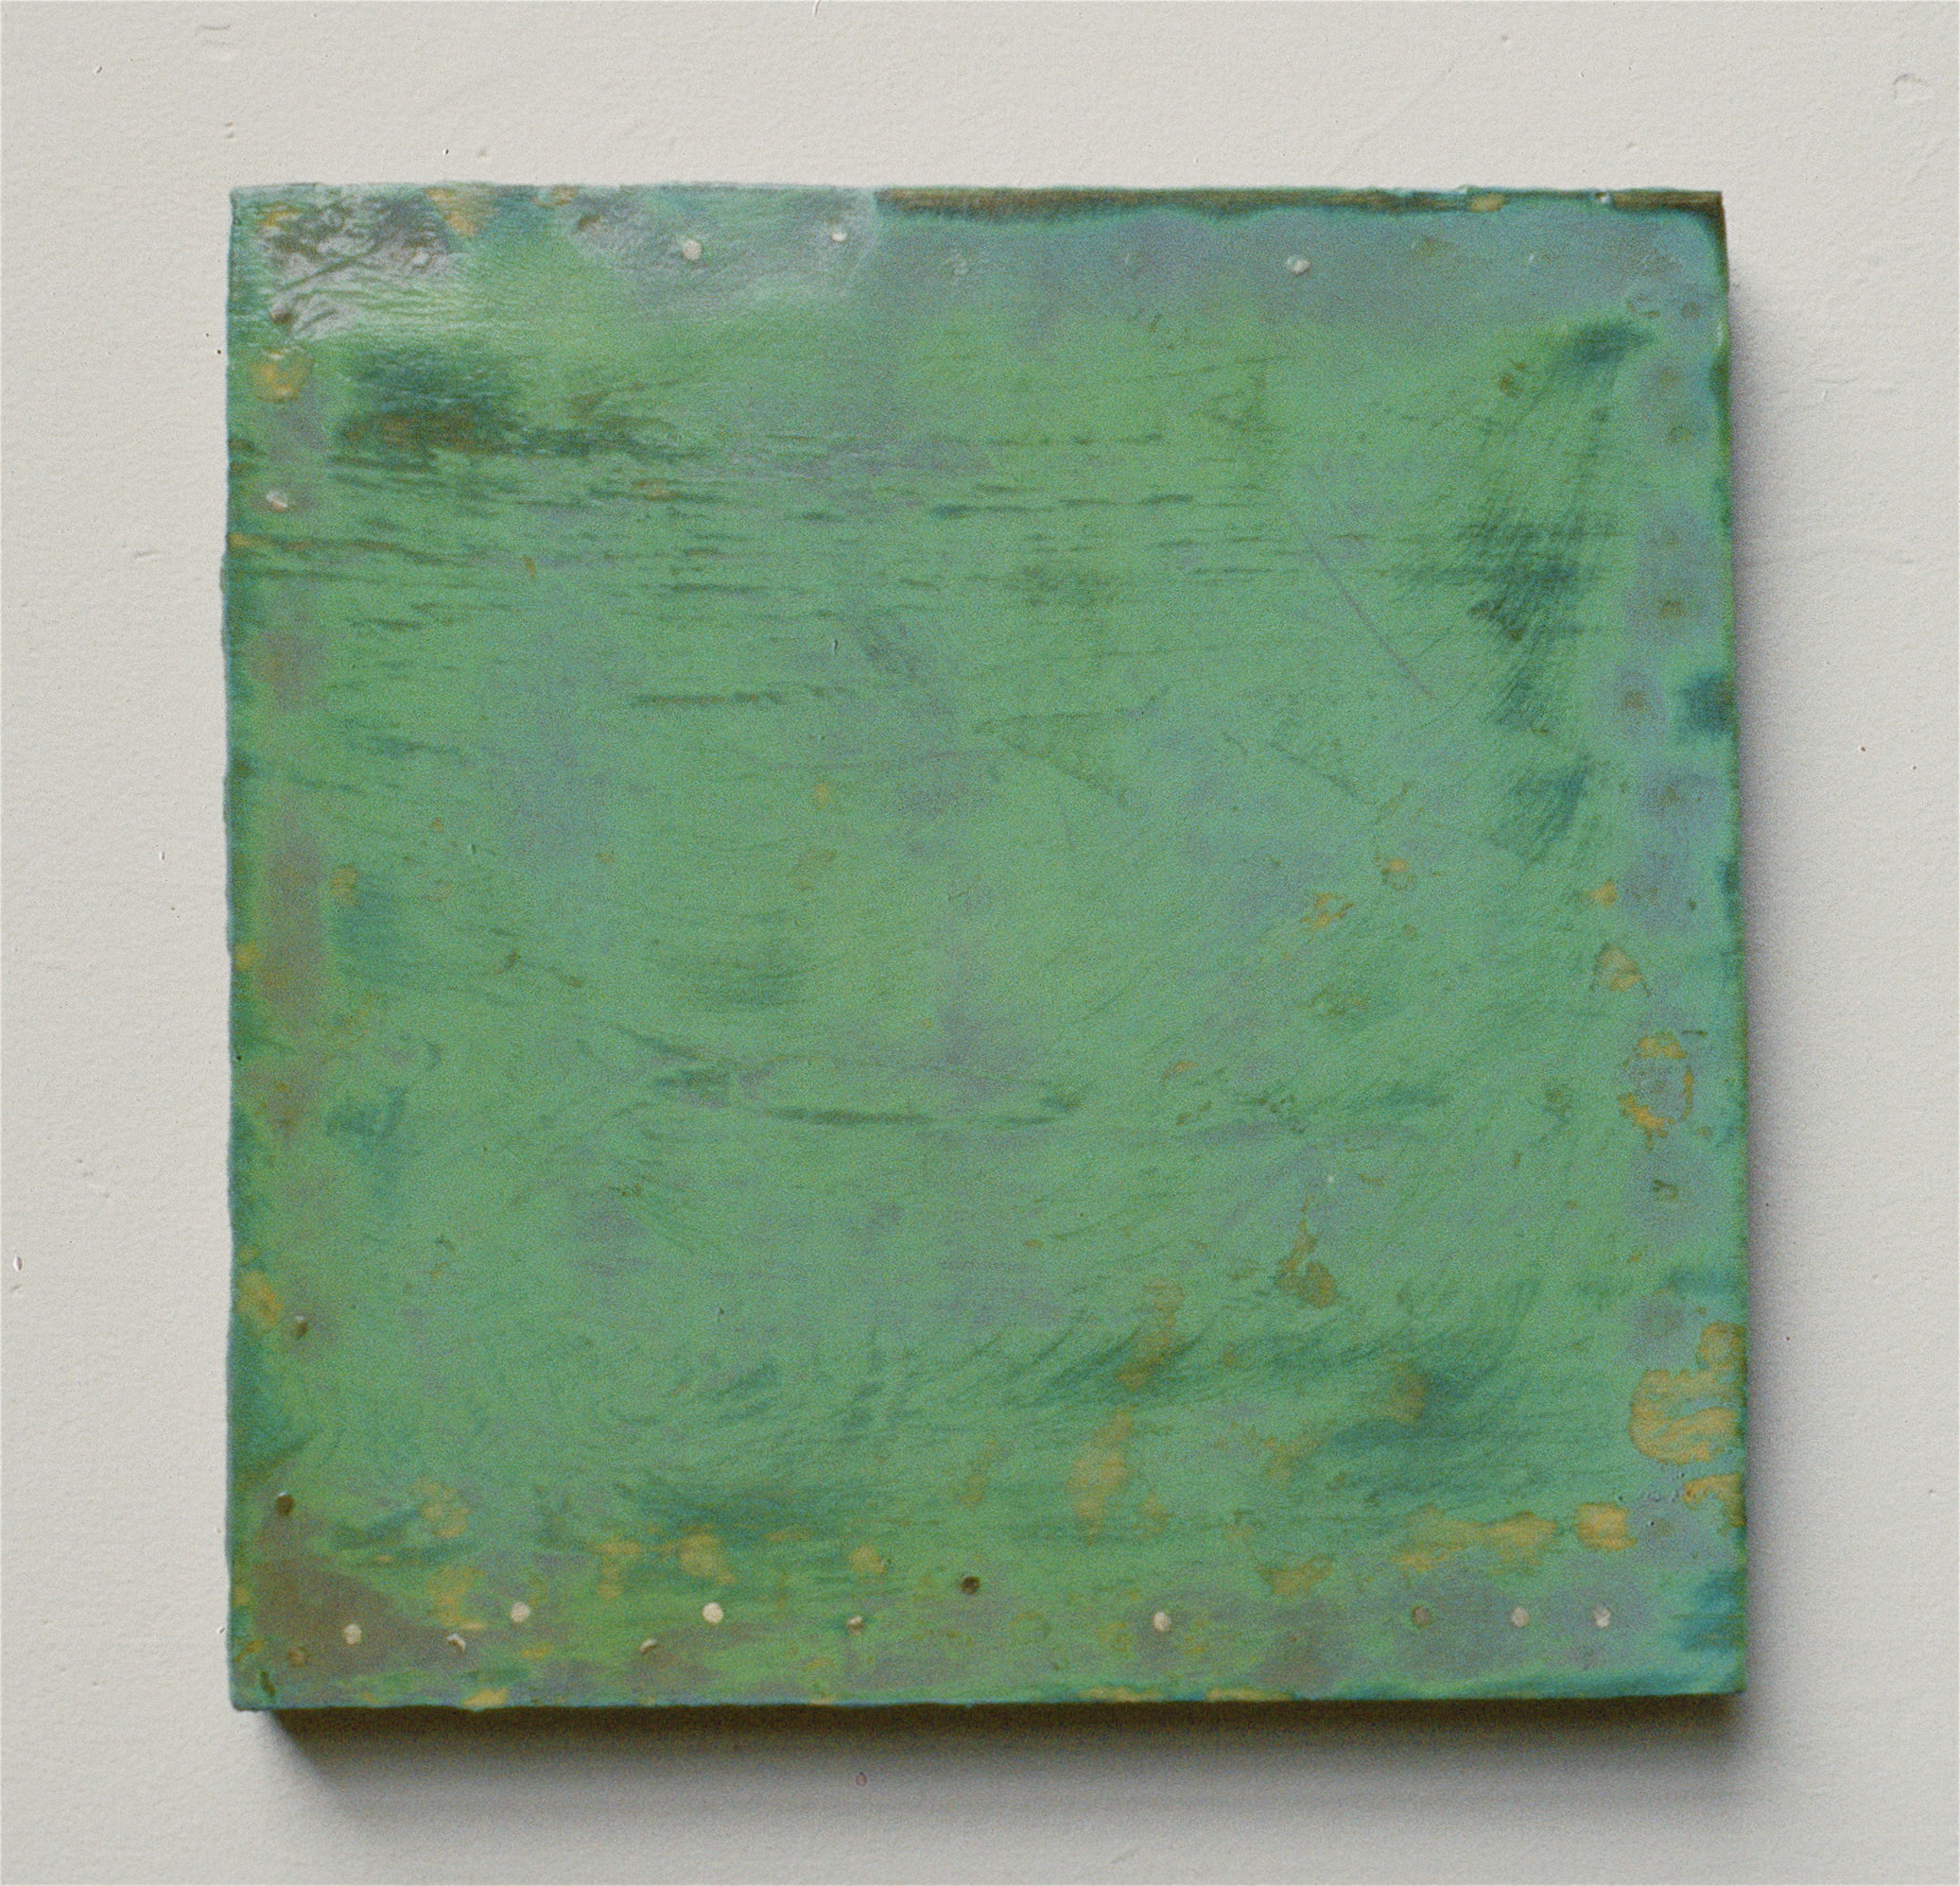    Green Square     oil on wood    12 x 12  inches    1985  